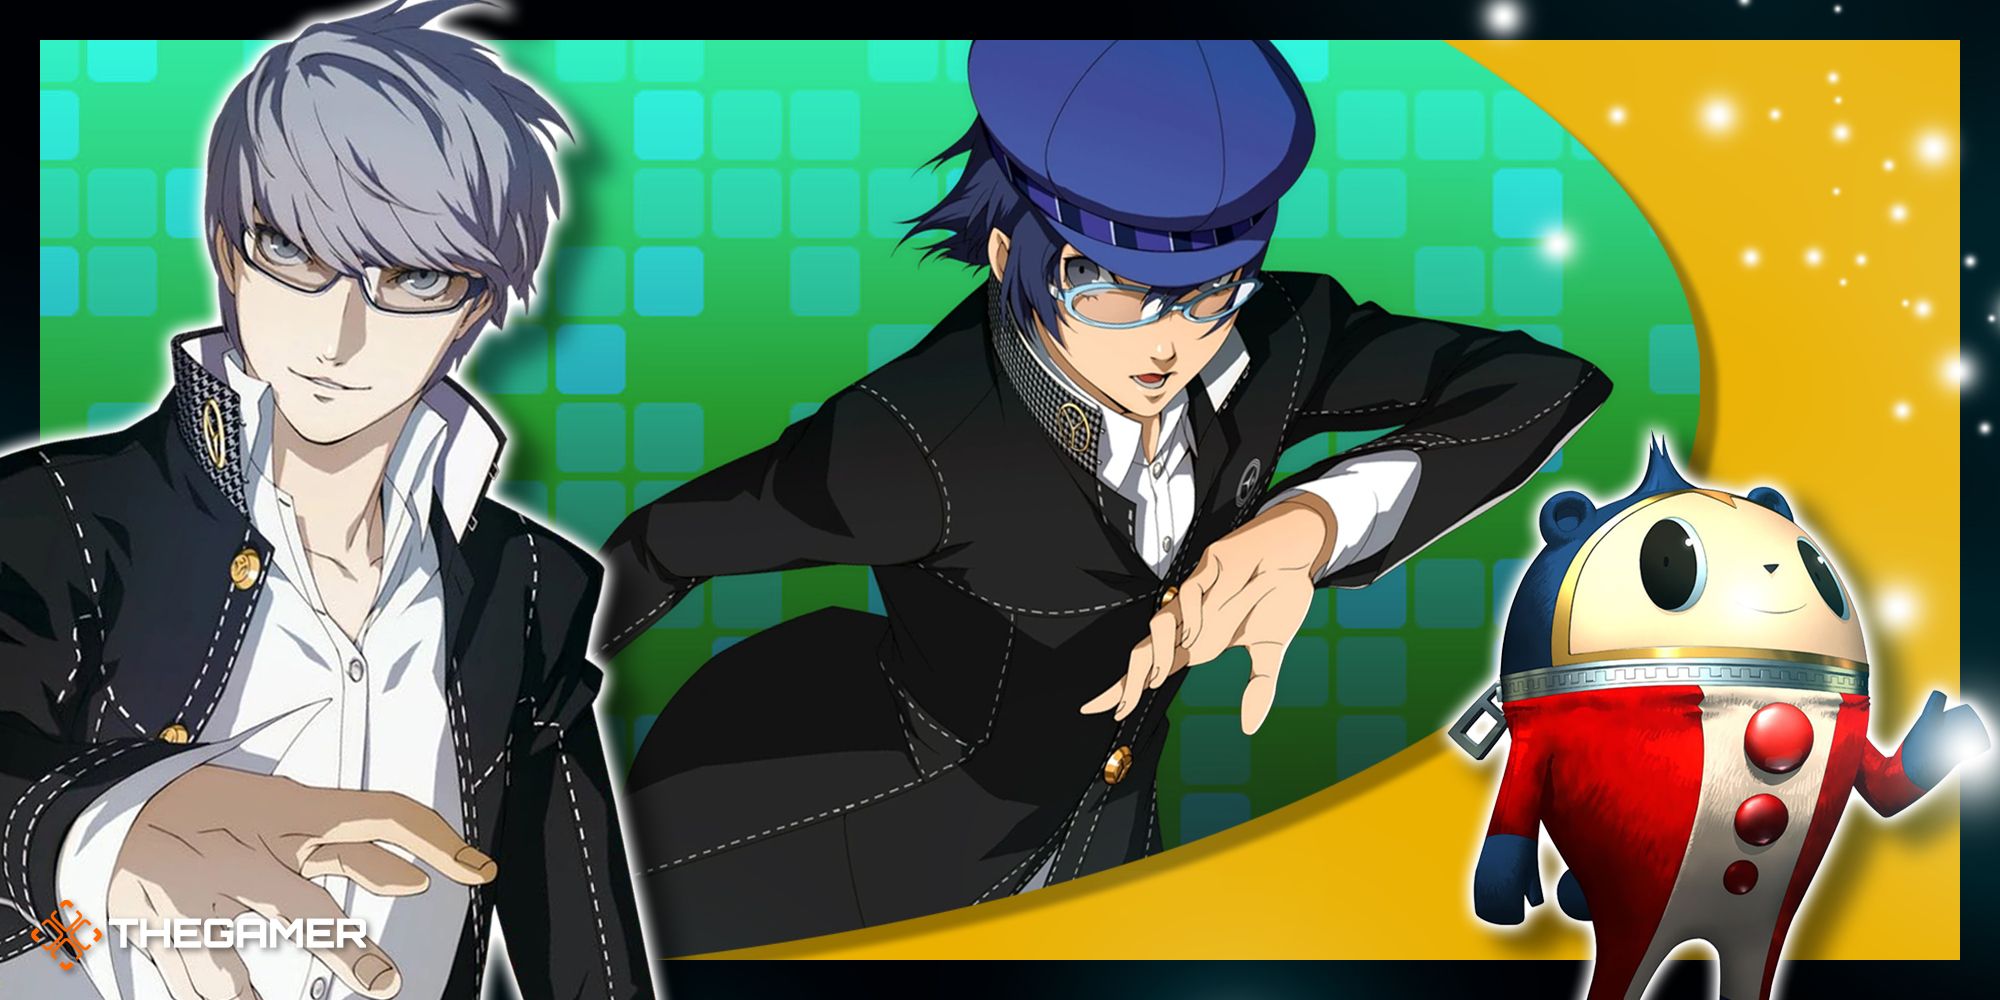 Persona 4 Golden - A collage of Yu, Naoto Shirogane, and Teddie.